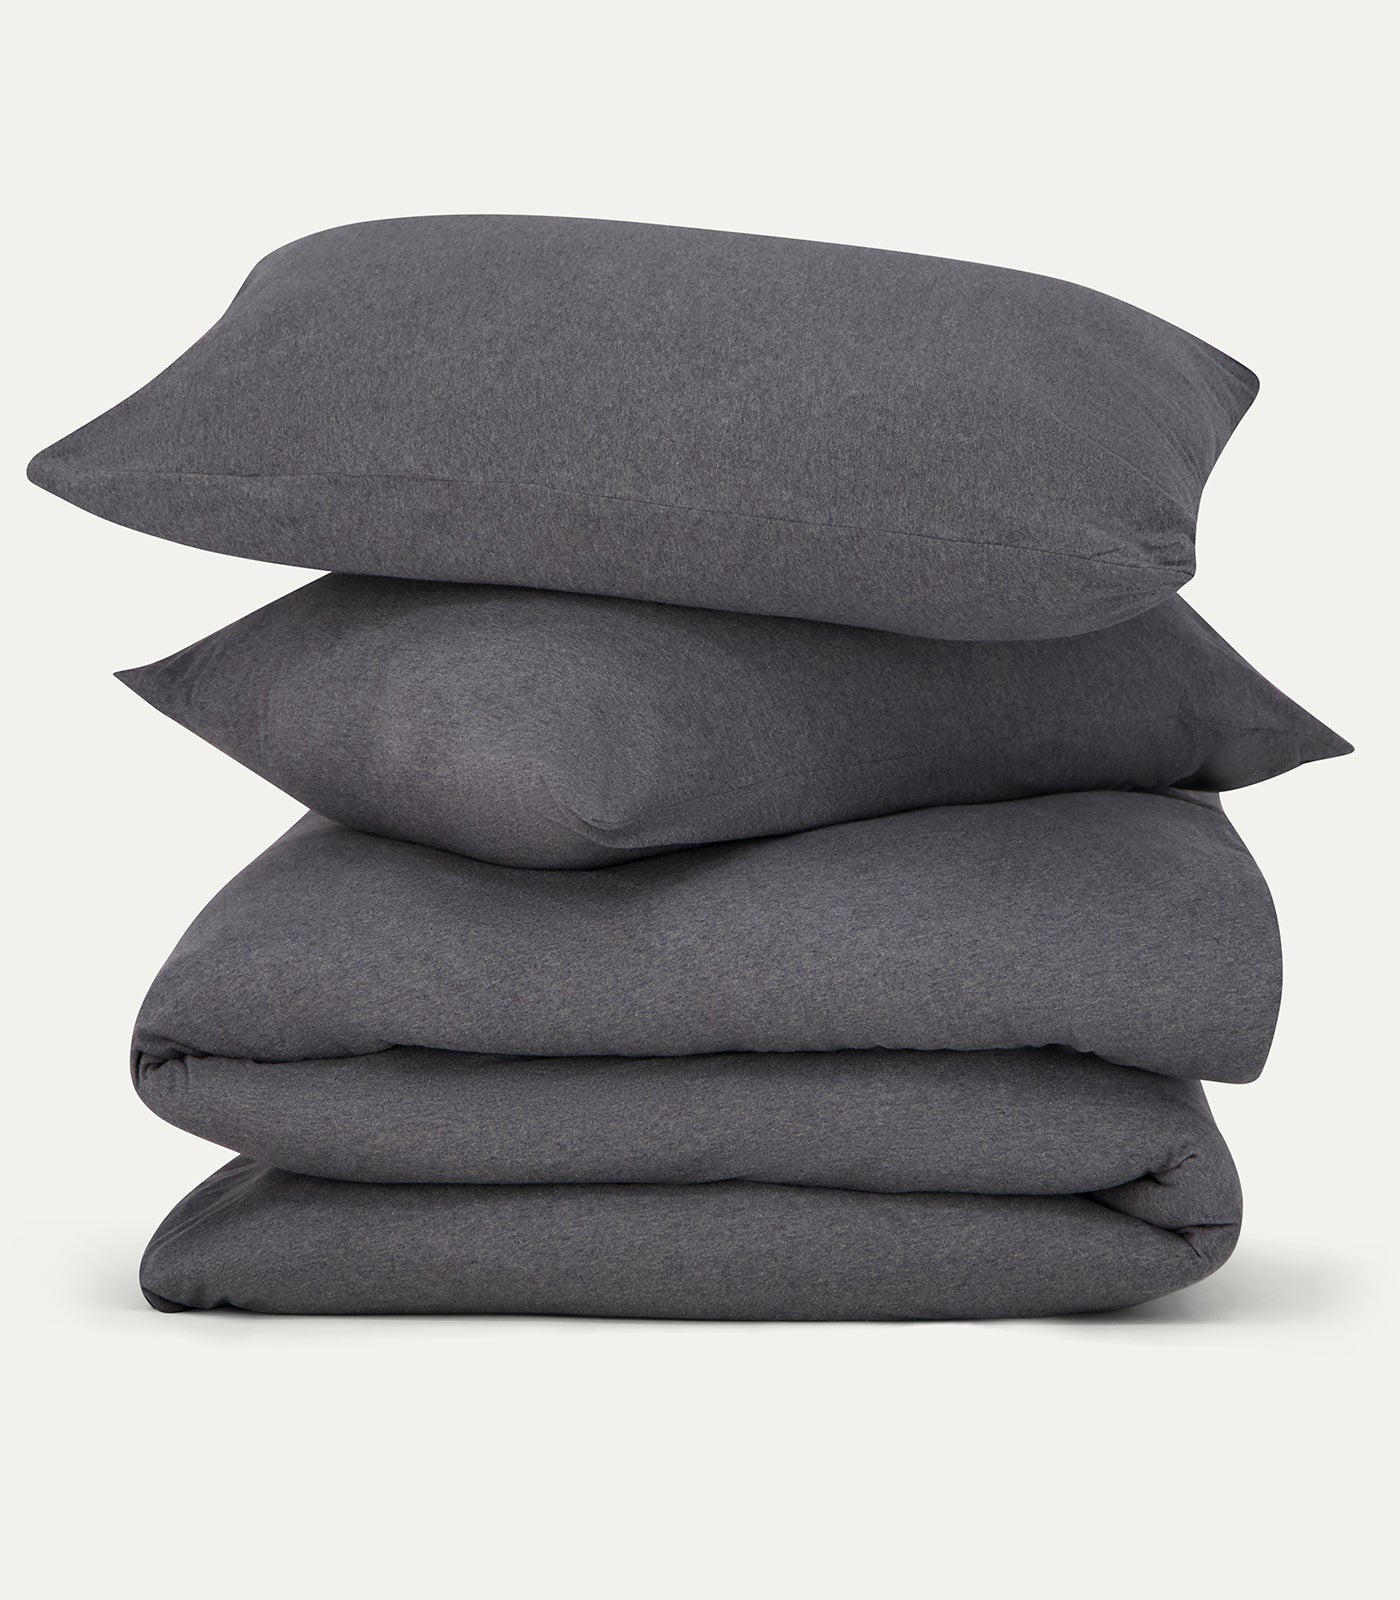 Bhumi Organic Cotton - Jersey Quilt Cover - Charcoal Melange